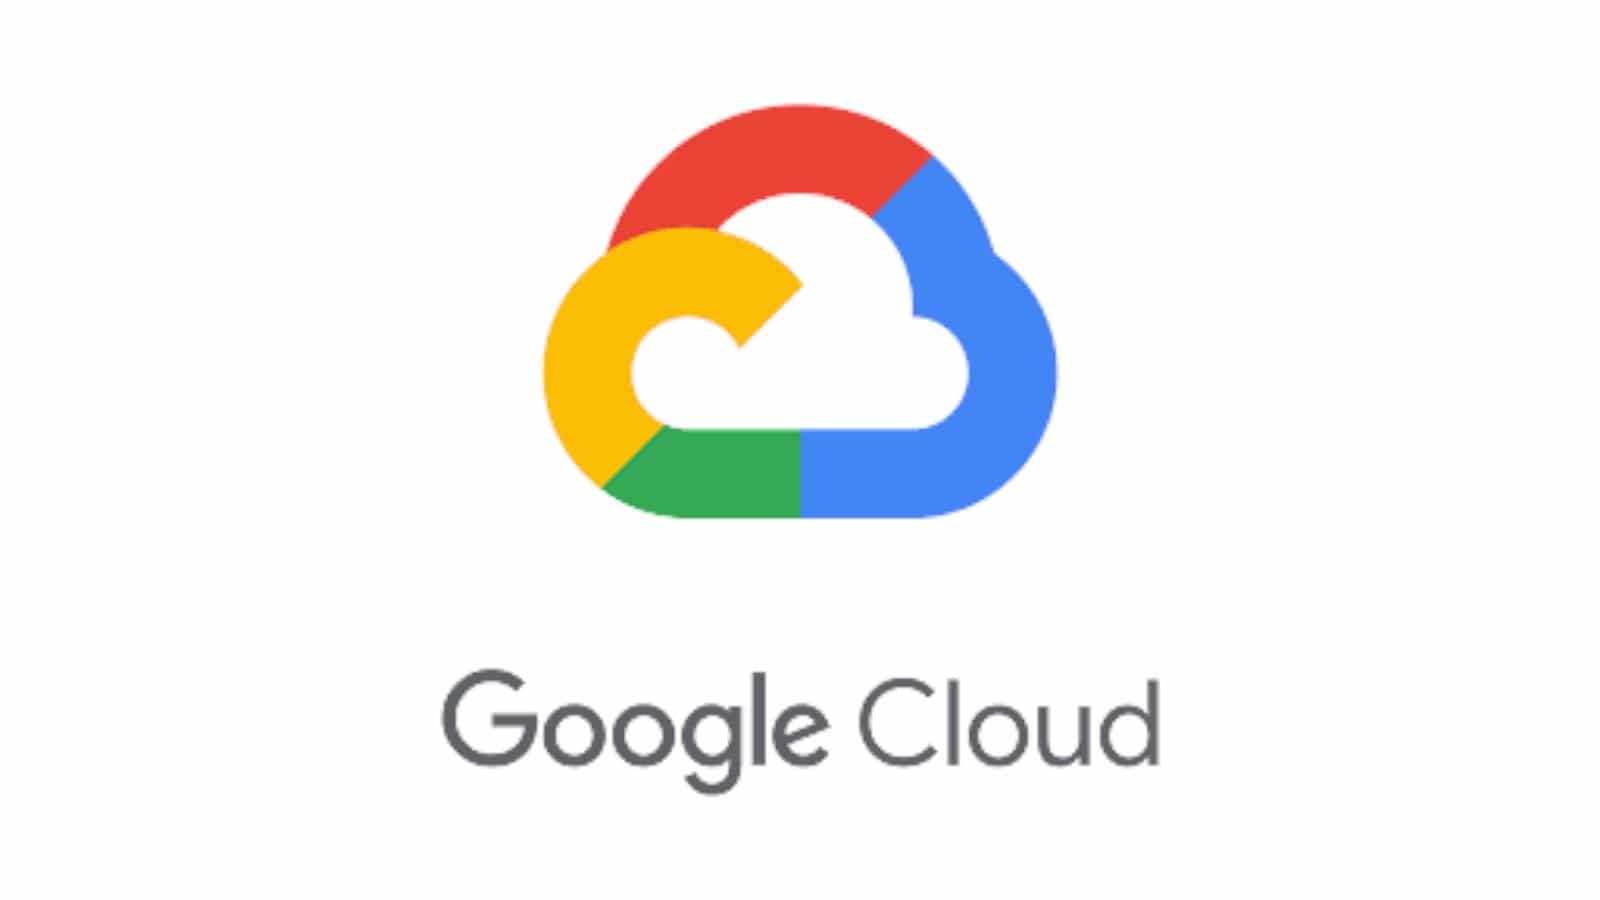 Hacked Google Cloud accounts are a pass for fraudulent miners